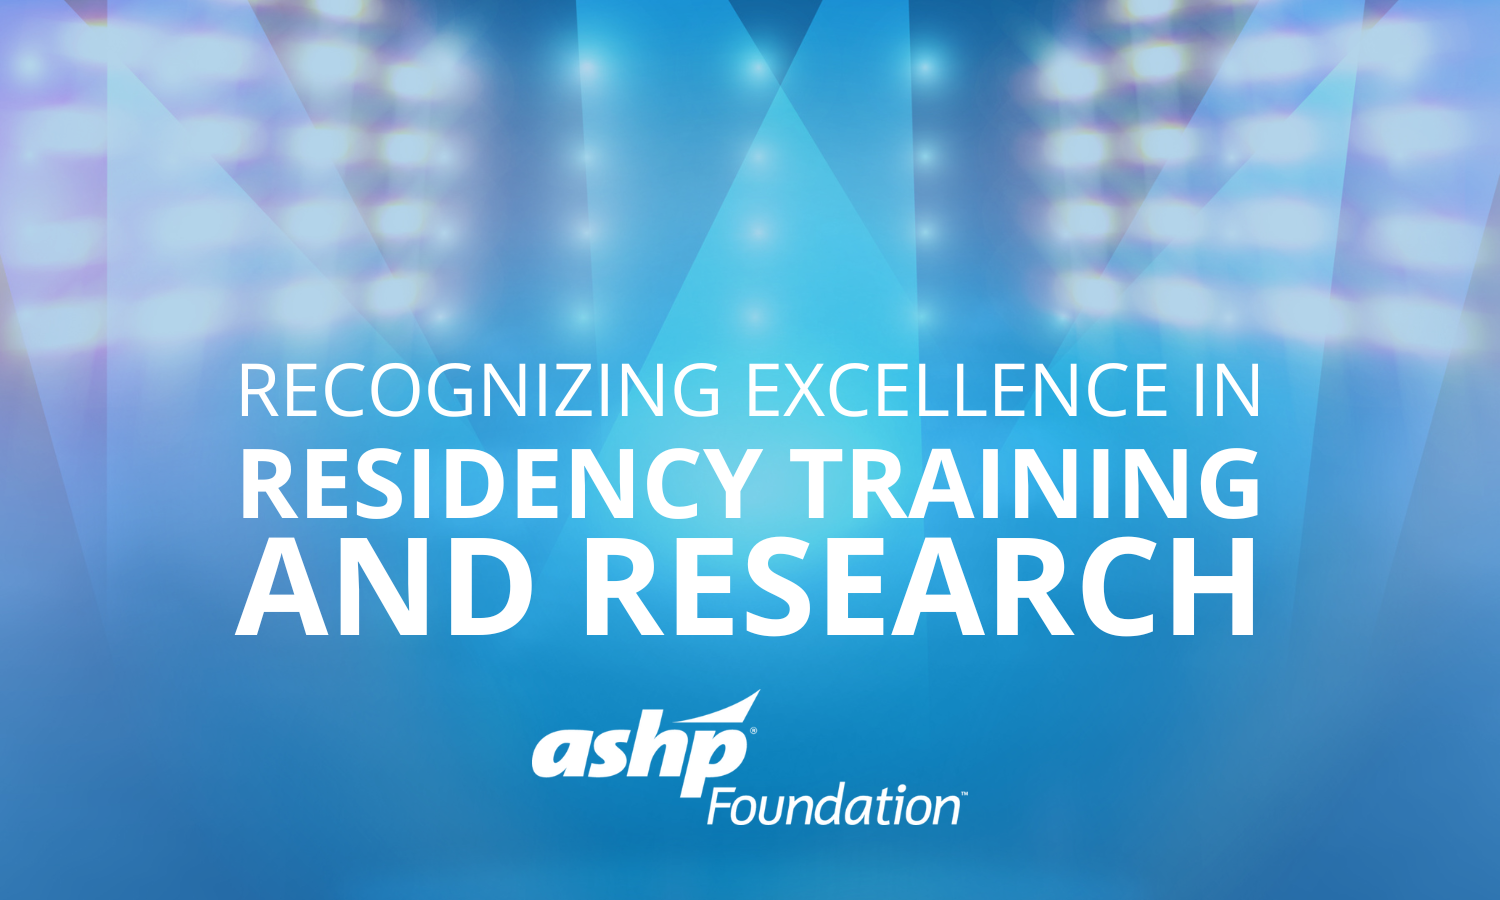 recognizing excellence in residency training and research - ashp foundation